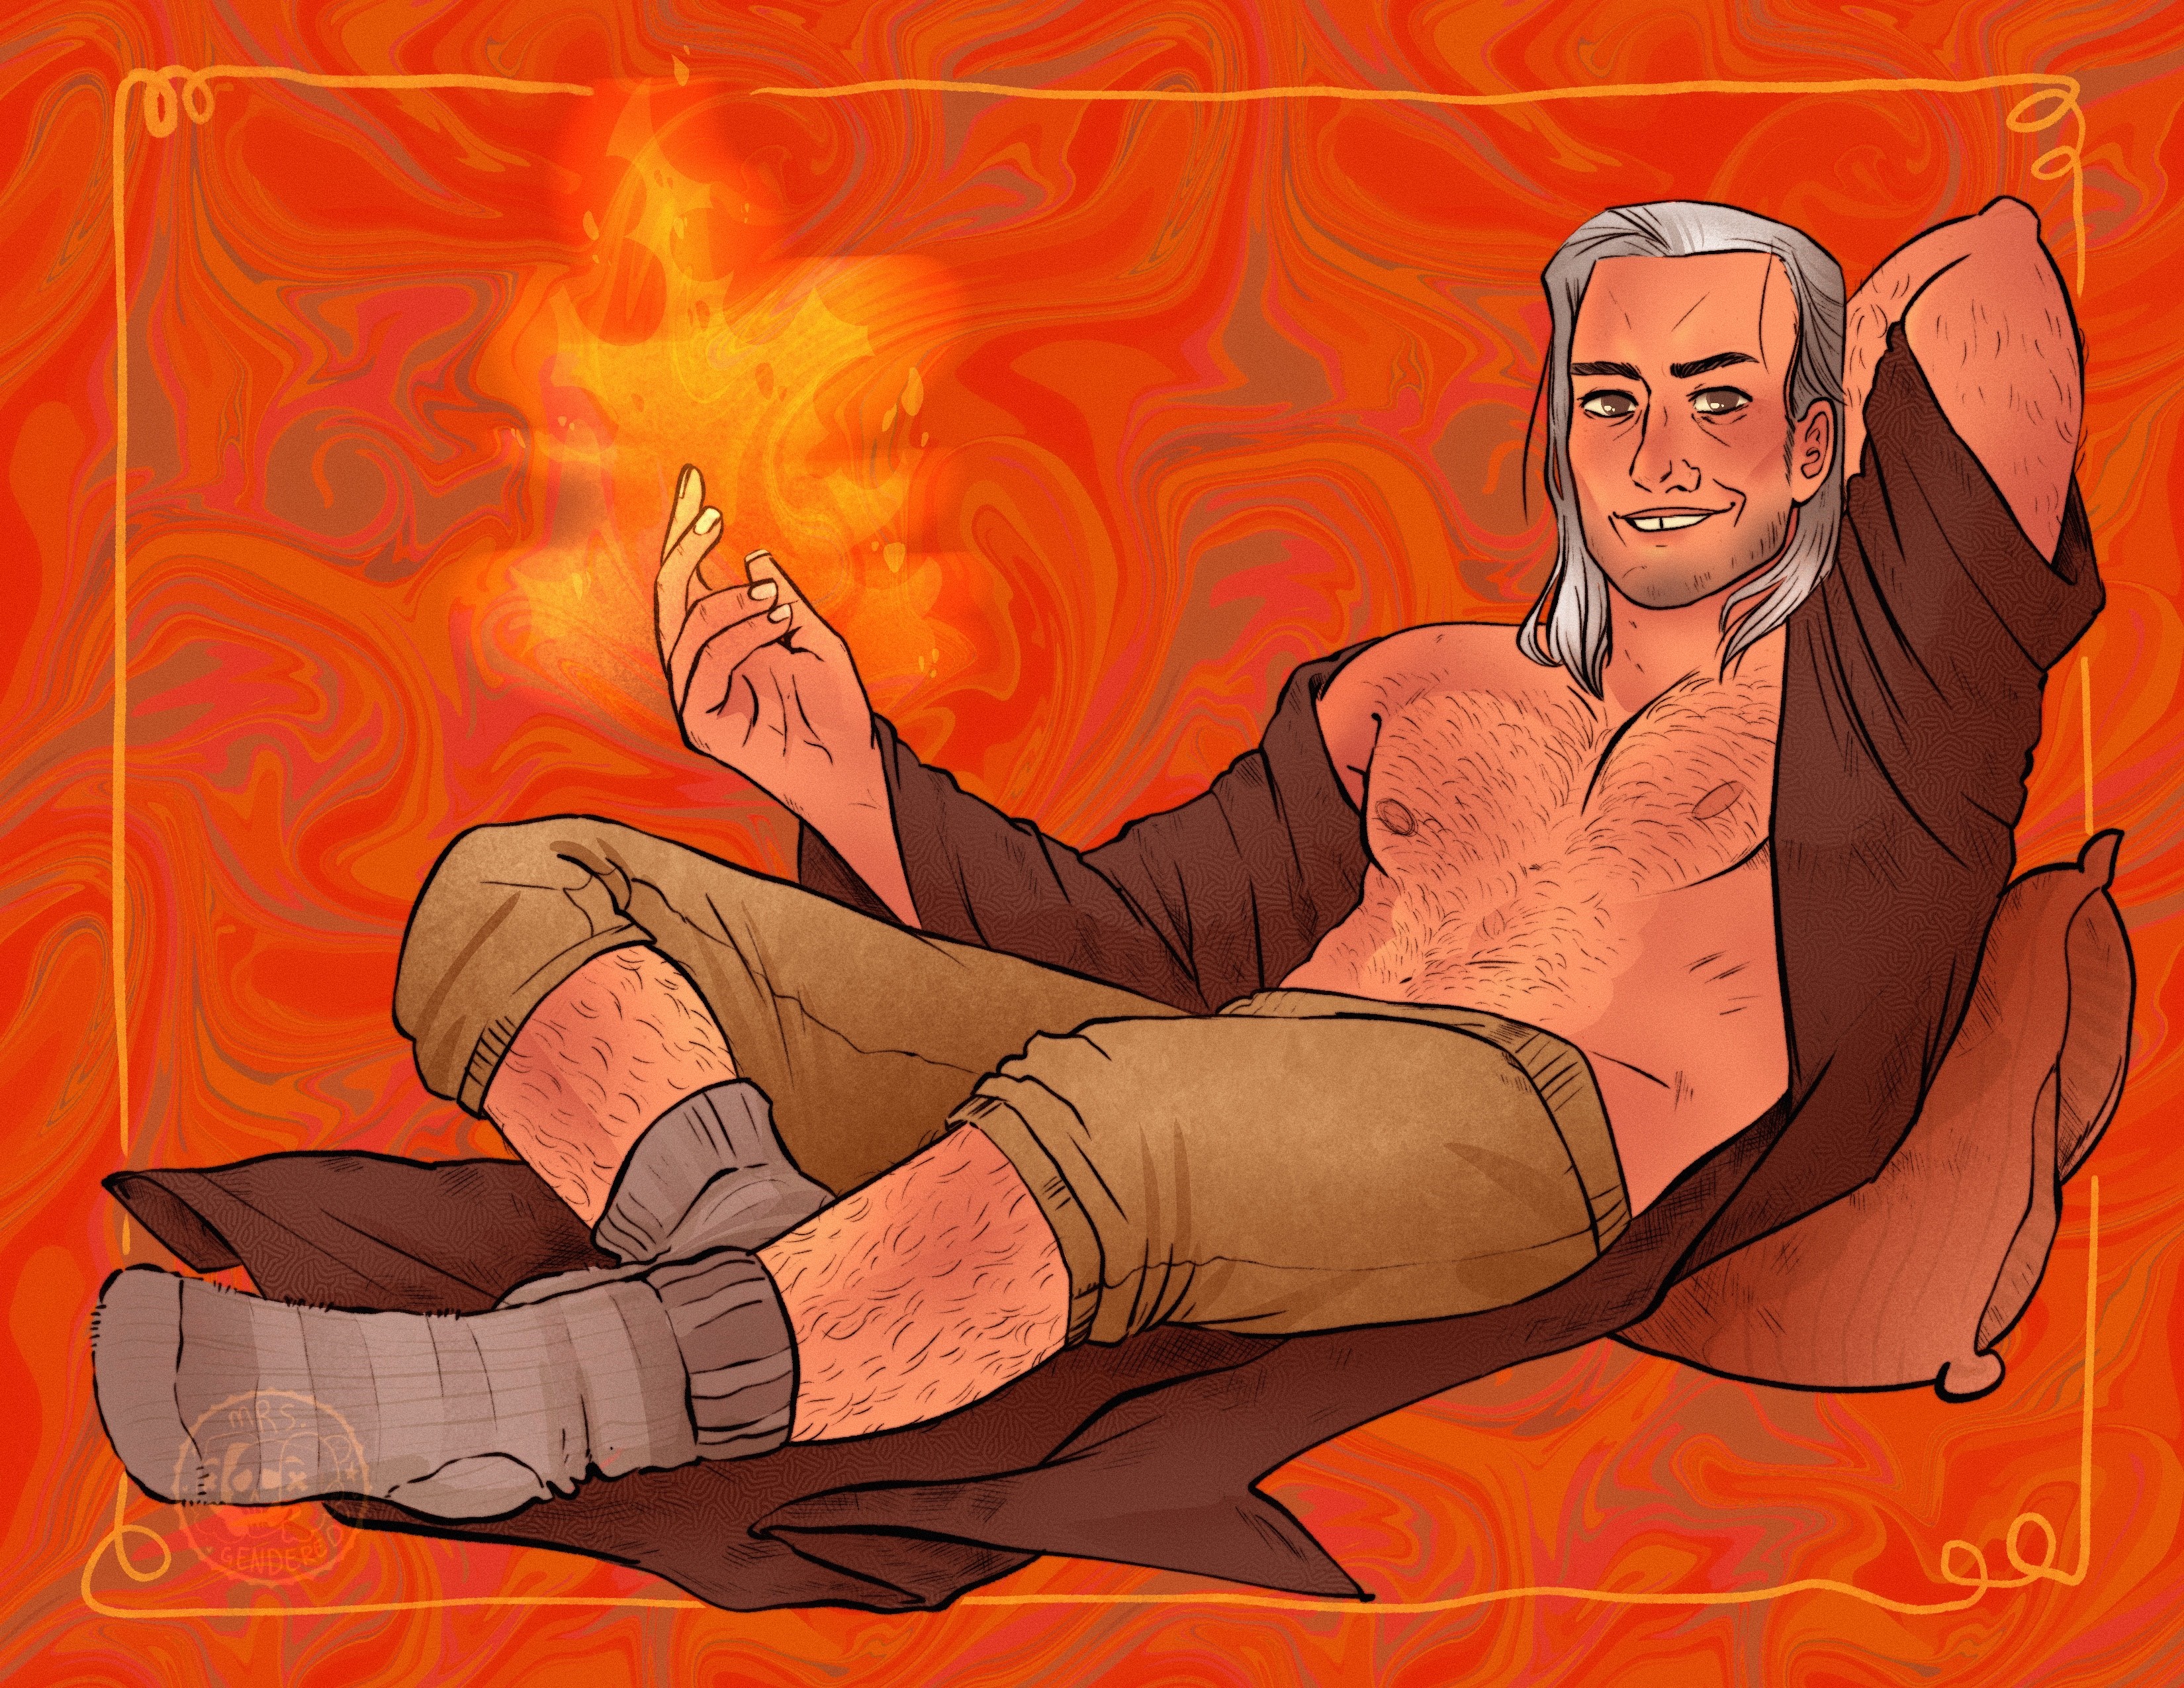 astral lying on a pillow with his shirt off and comfy socks, wearing a robe and holding fire in his hands like it's no big deal